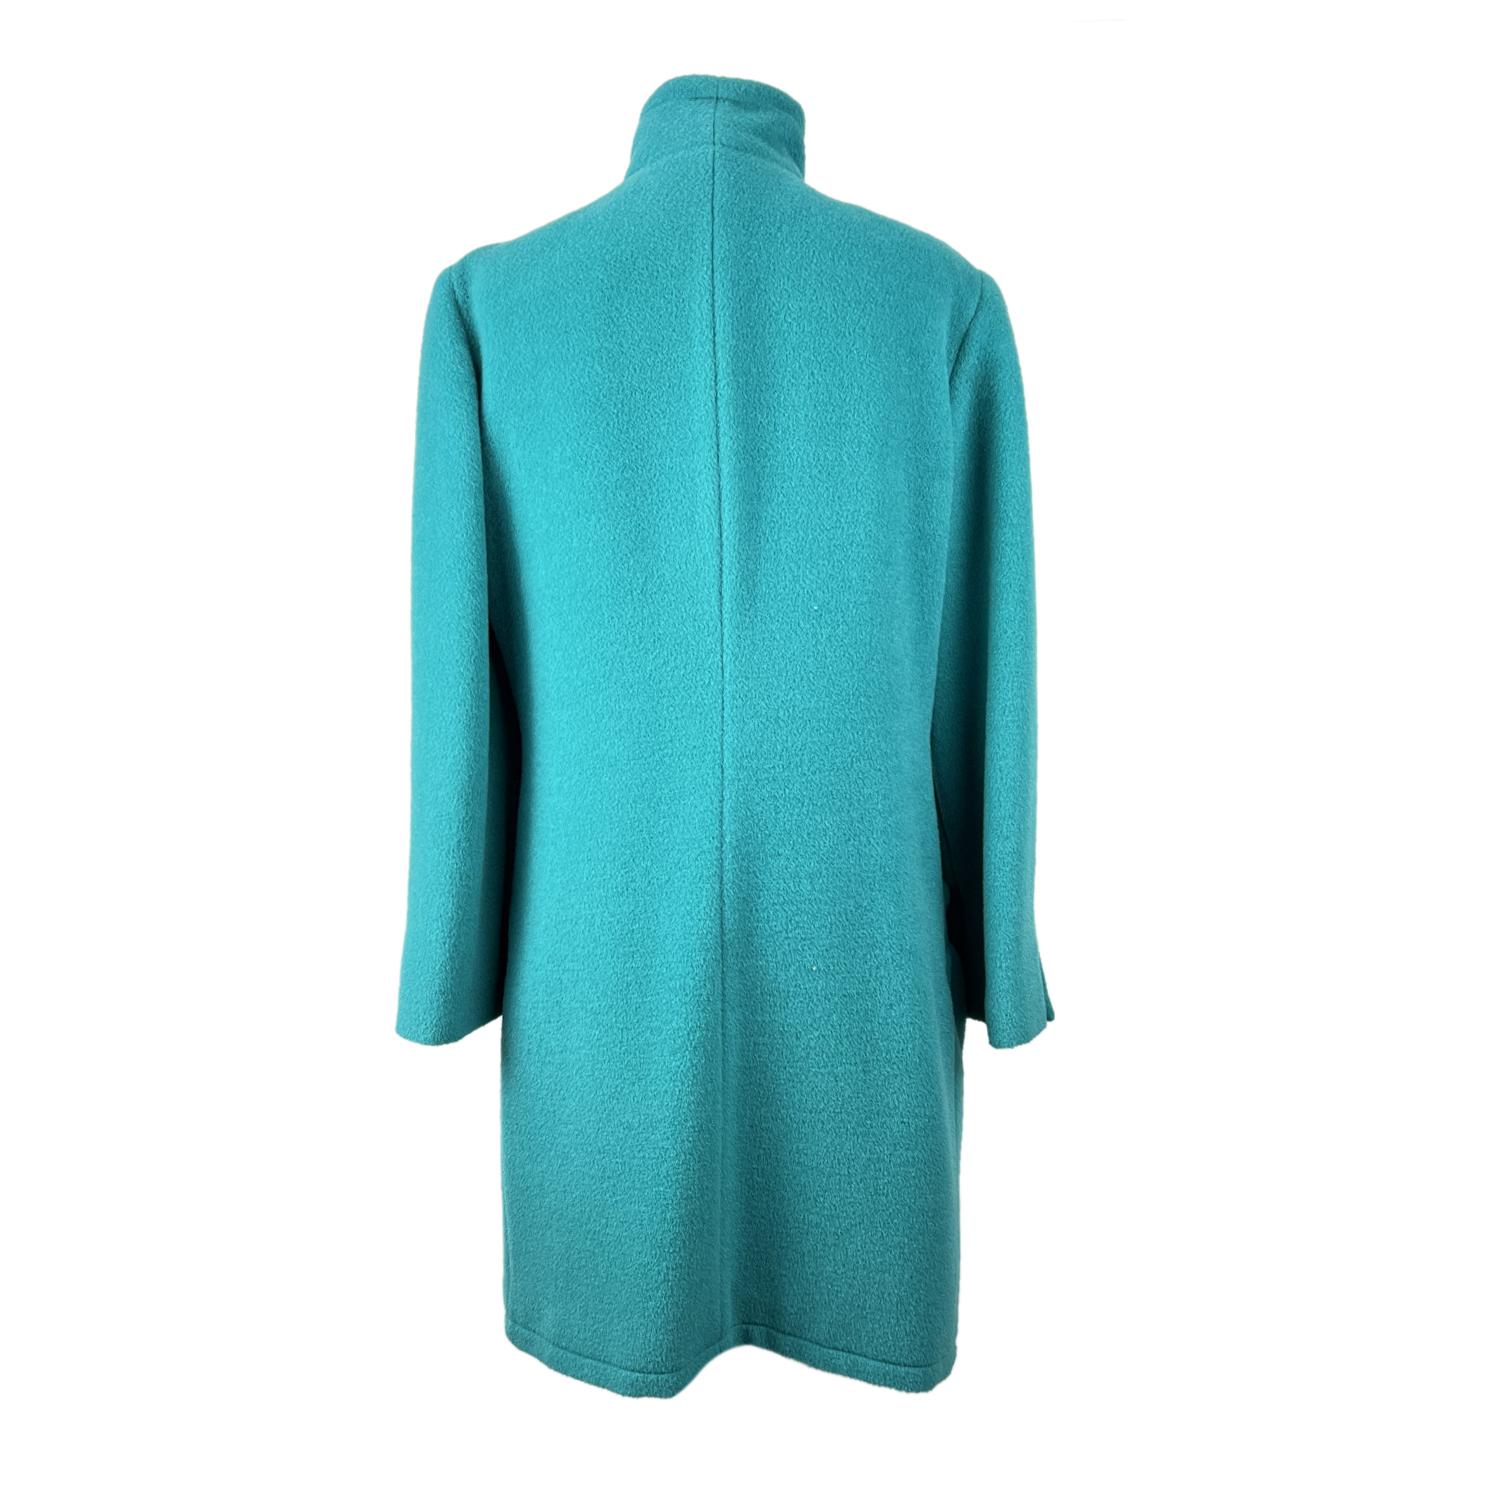 Vintage Krizia turquoise coat. Funnel neckline. Long sleeve styling with buttoned cuffs. Front button closure. 2 waist pockets. Lined. Composition: 50% alpaca, 30% mohair, 20% wool. Size: 40 IT

Details

MATERIAL: Wool

COLOR: Turquoise

MODEL: